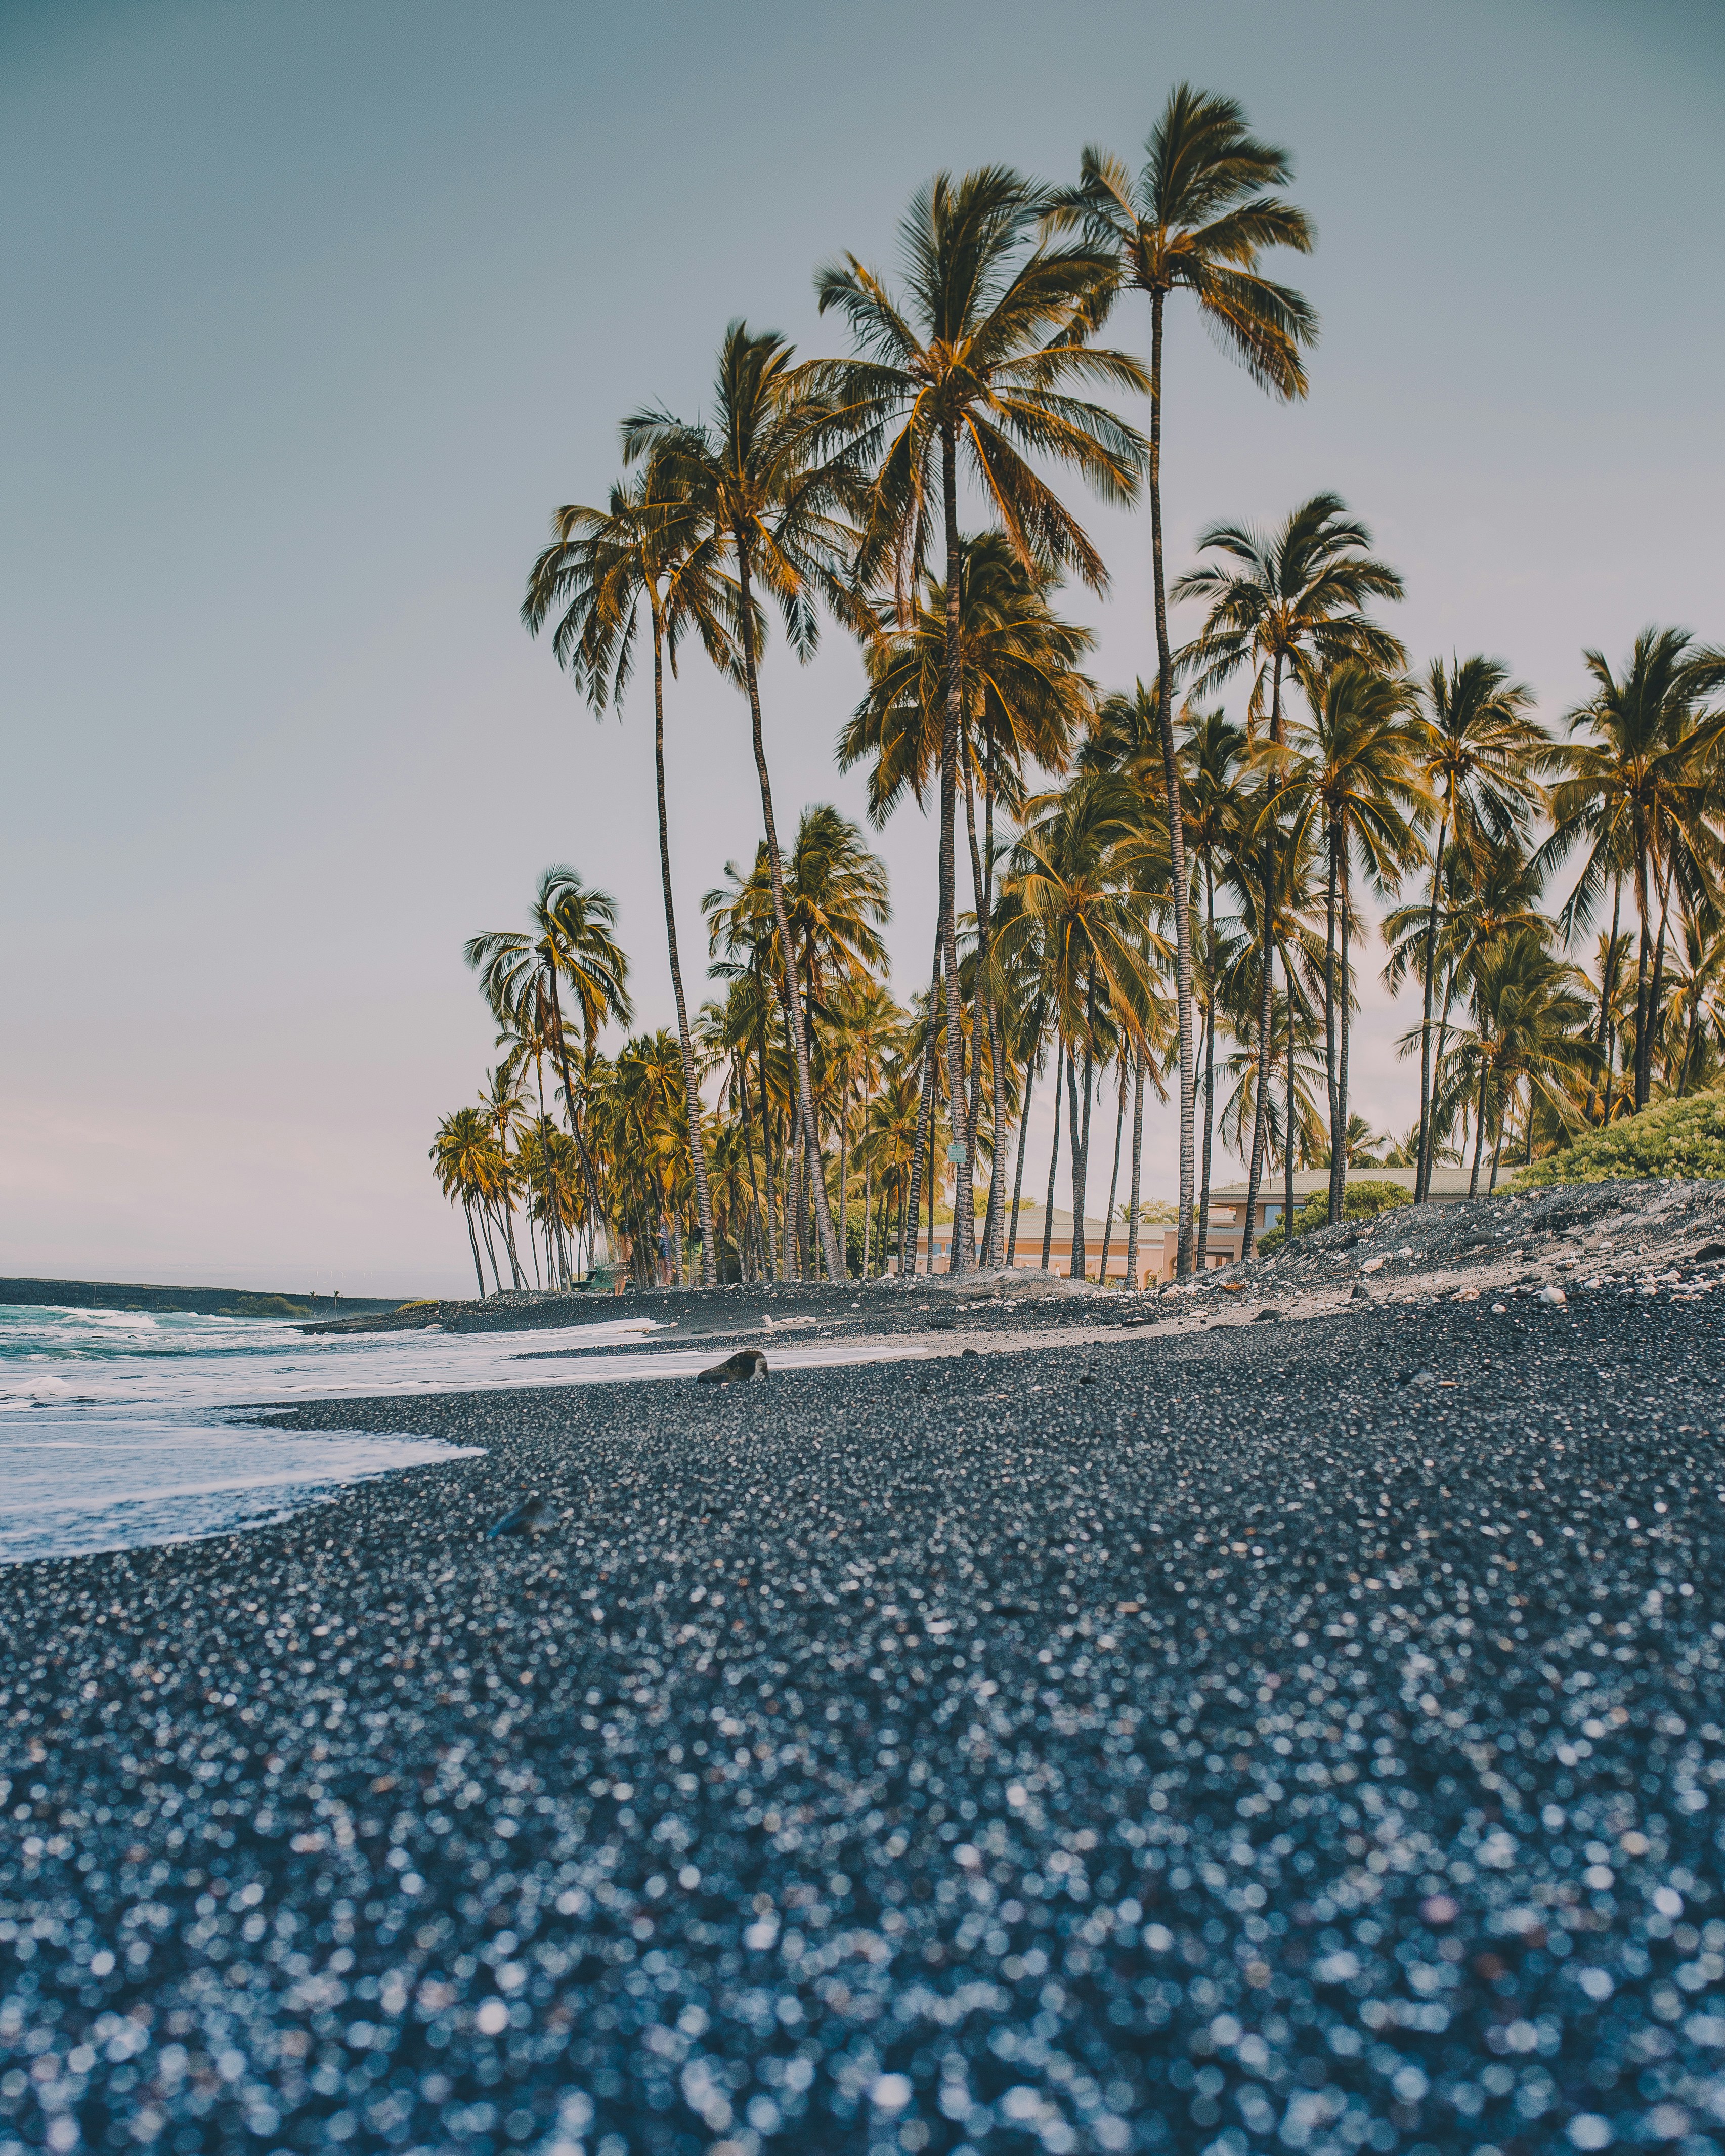 great photo recipe,how to photograph have you ever seen a black sand beach?; trees near coastline